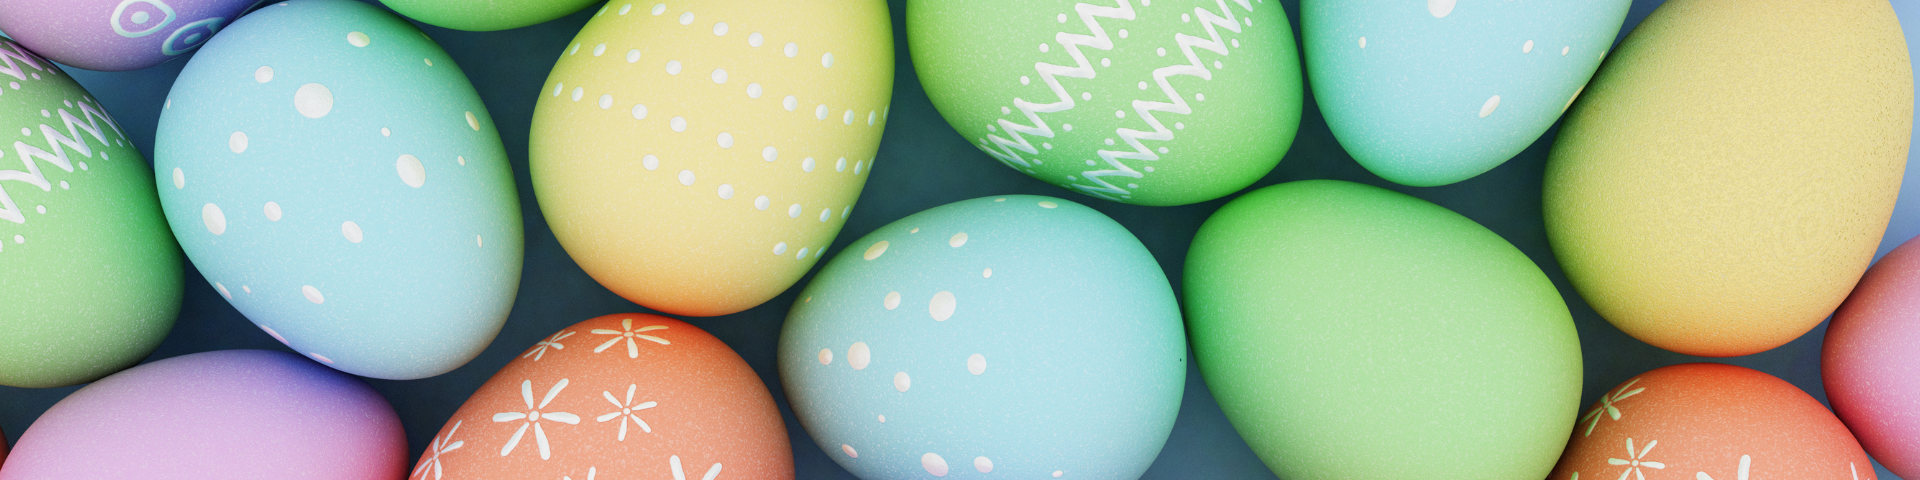 Easter eggs in multiple pastel colors.